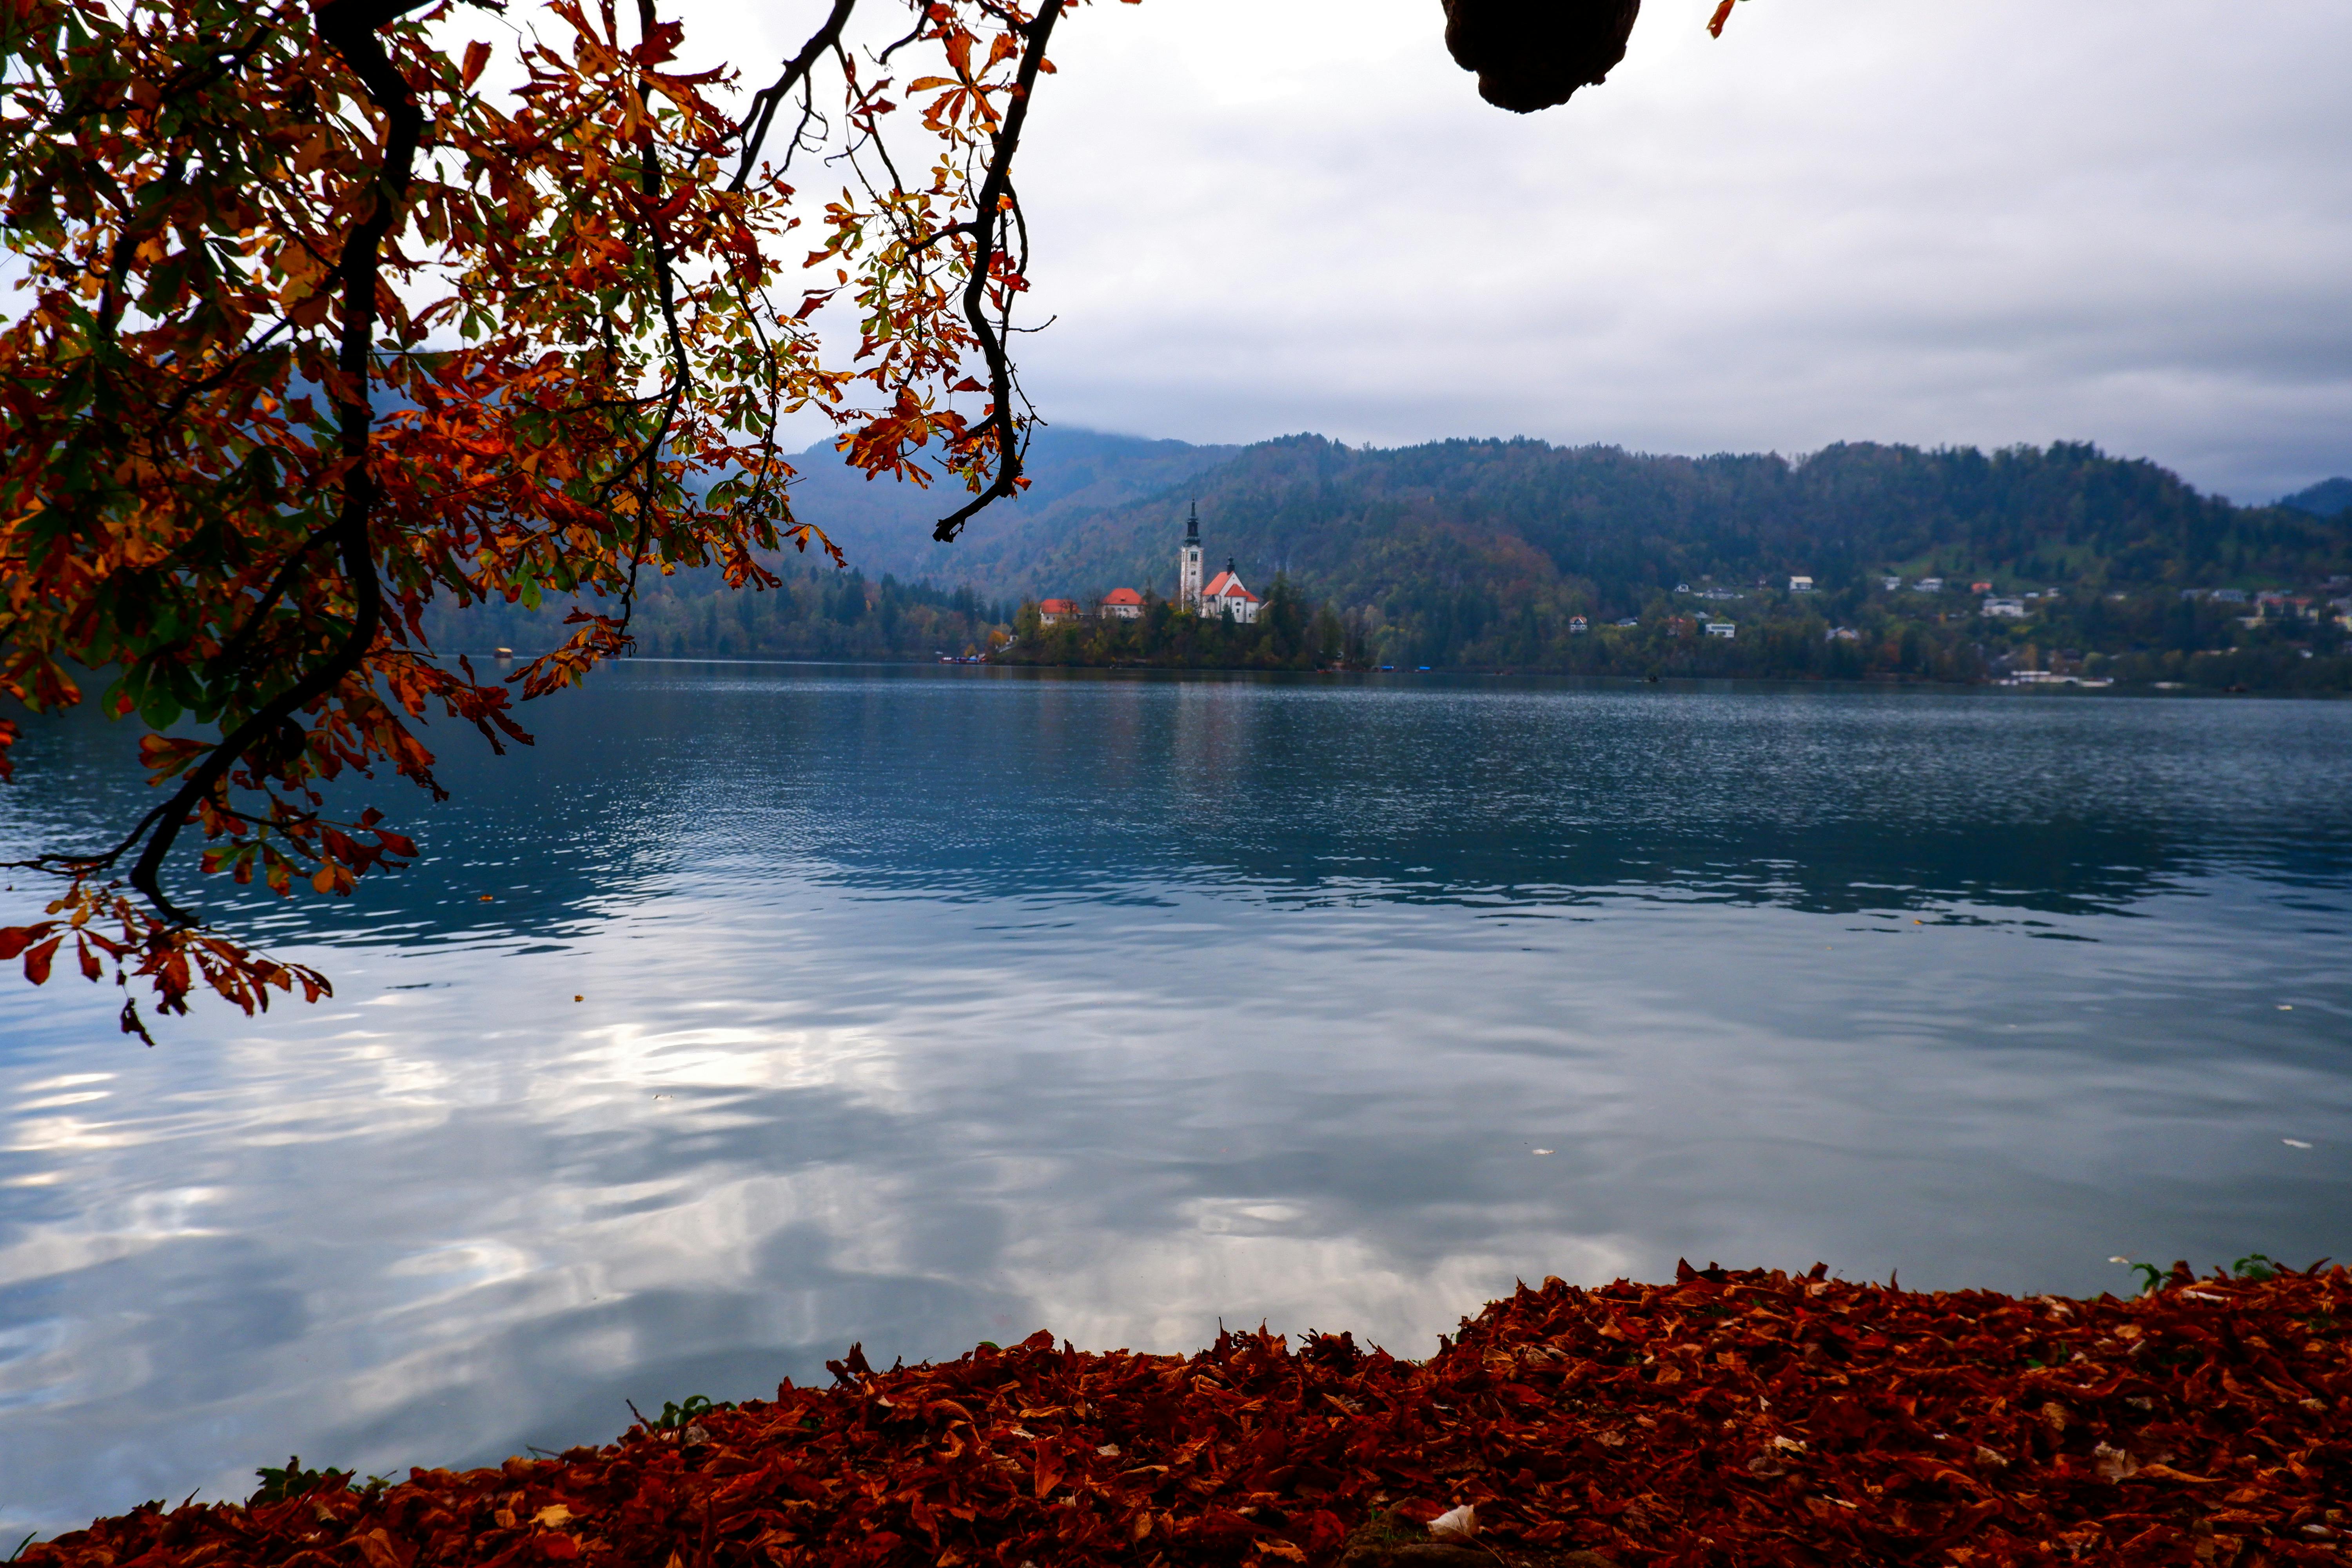 Lago Di Bled 3 Photos & Videos Collected By Viofla Ph